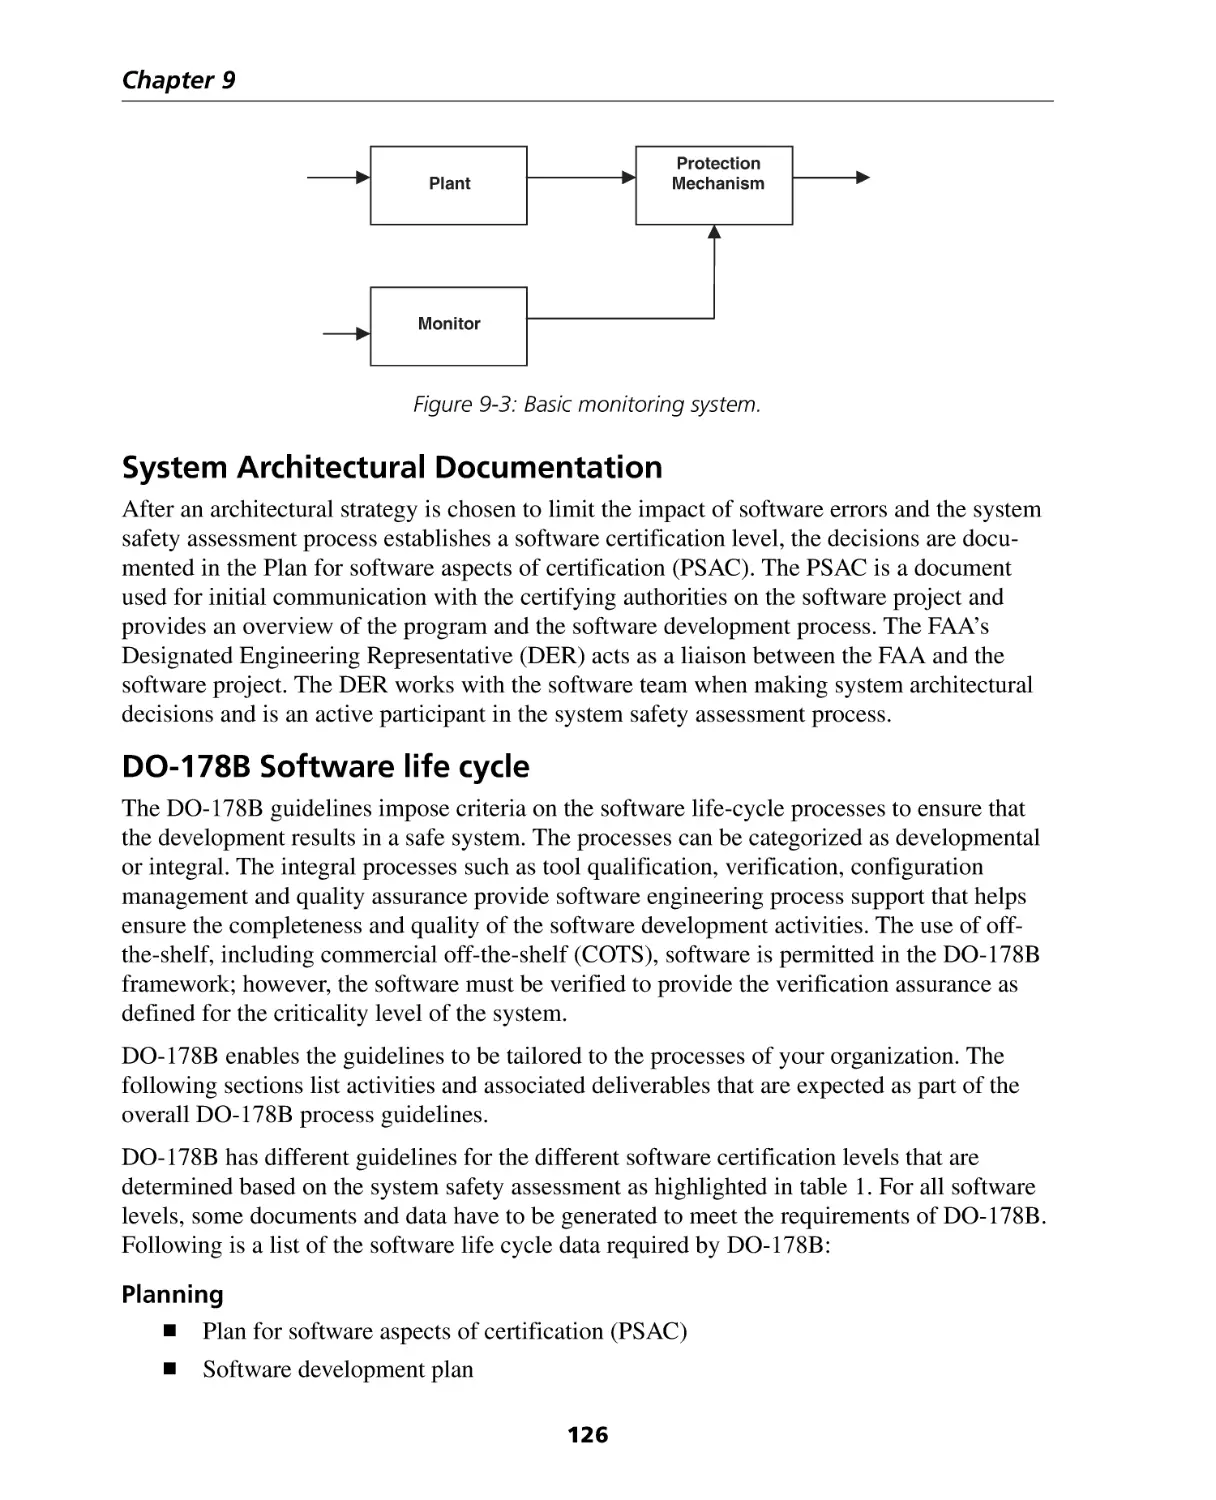 System Architectural Documentation
DO-178B Software life cycle